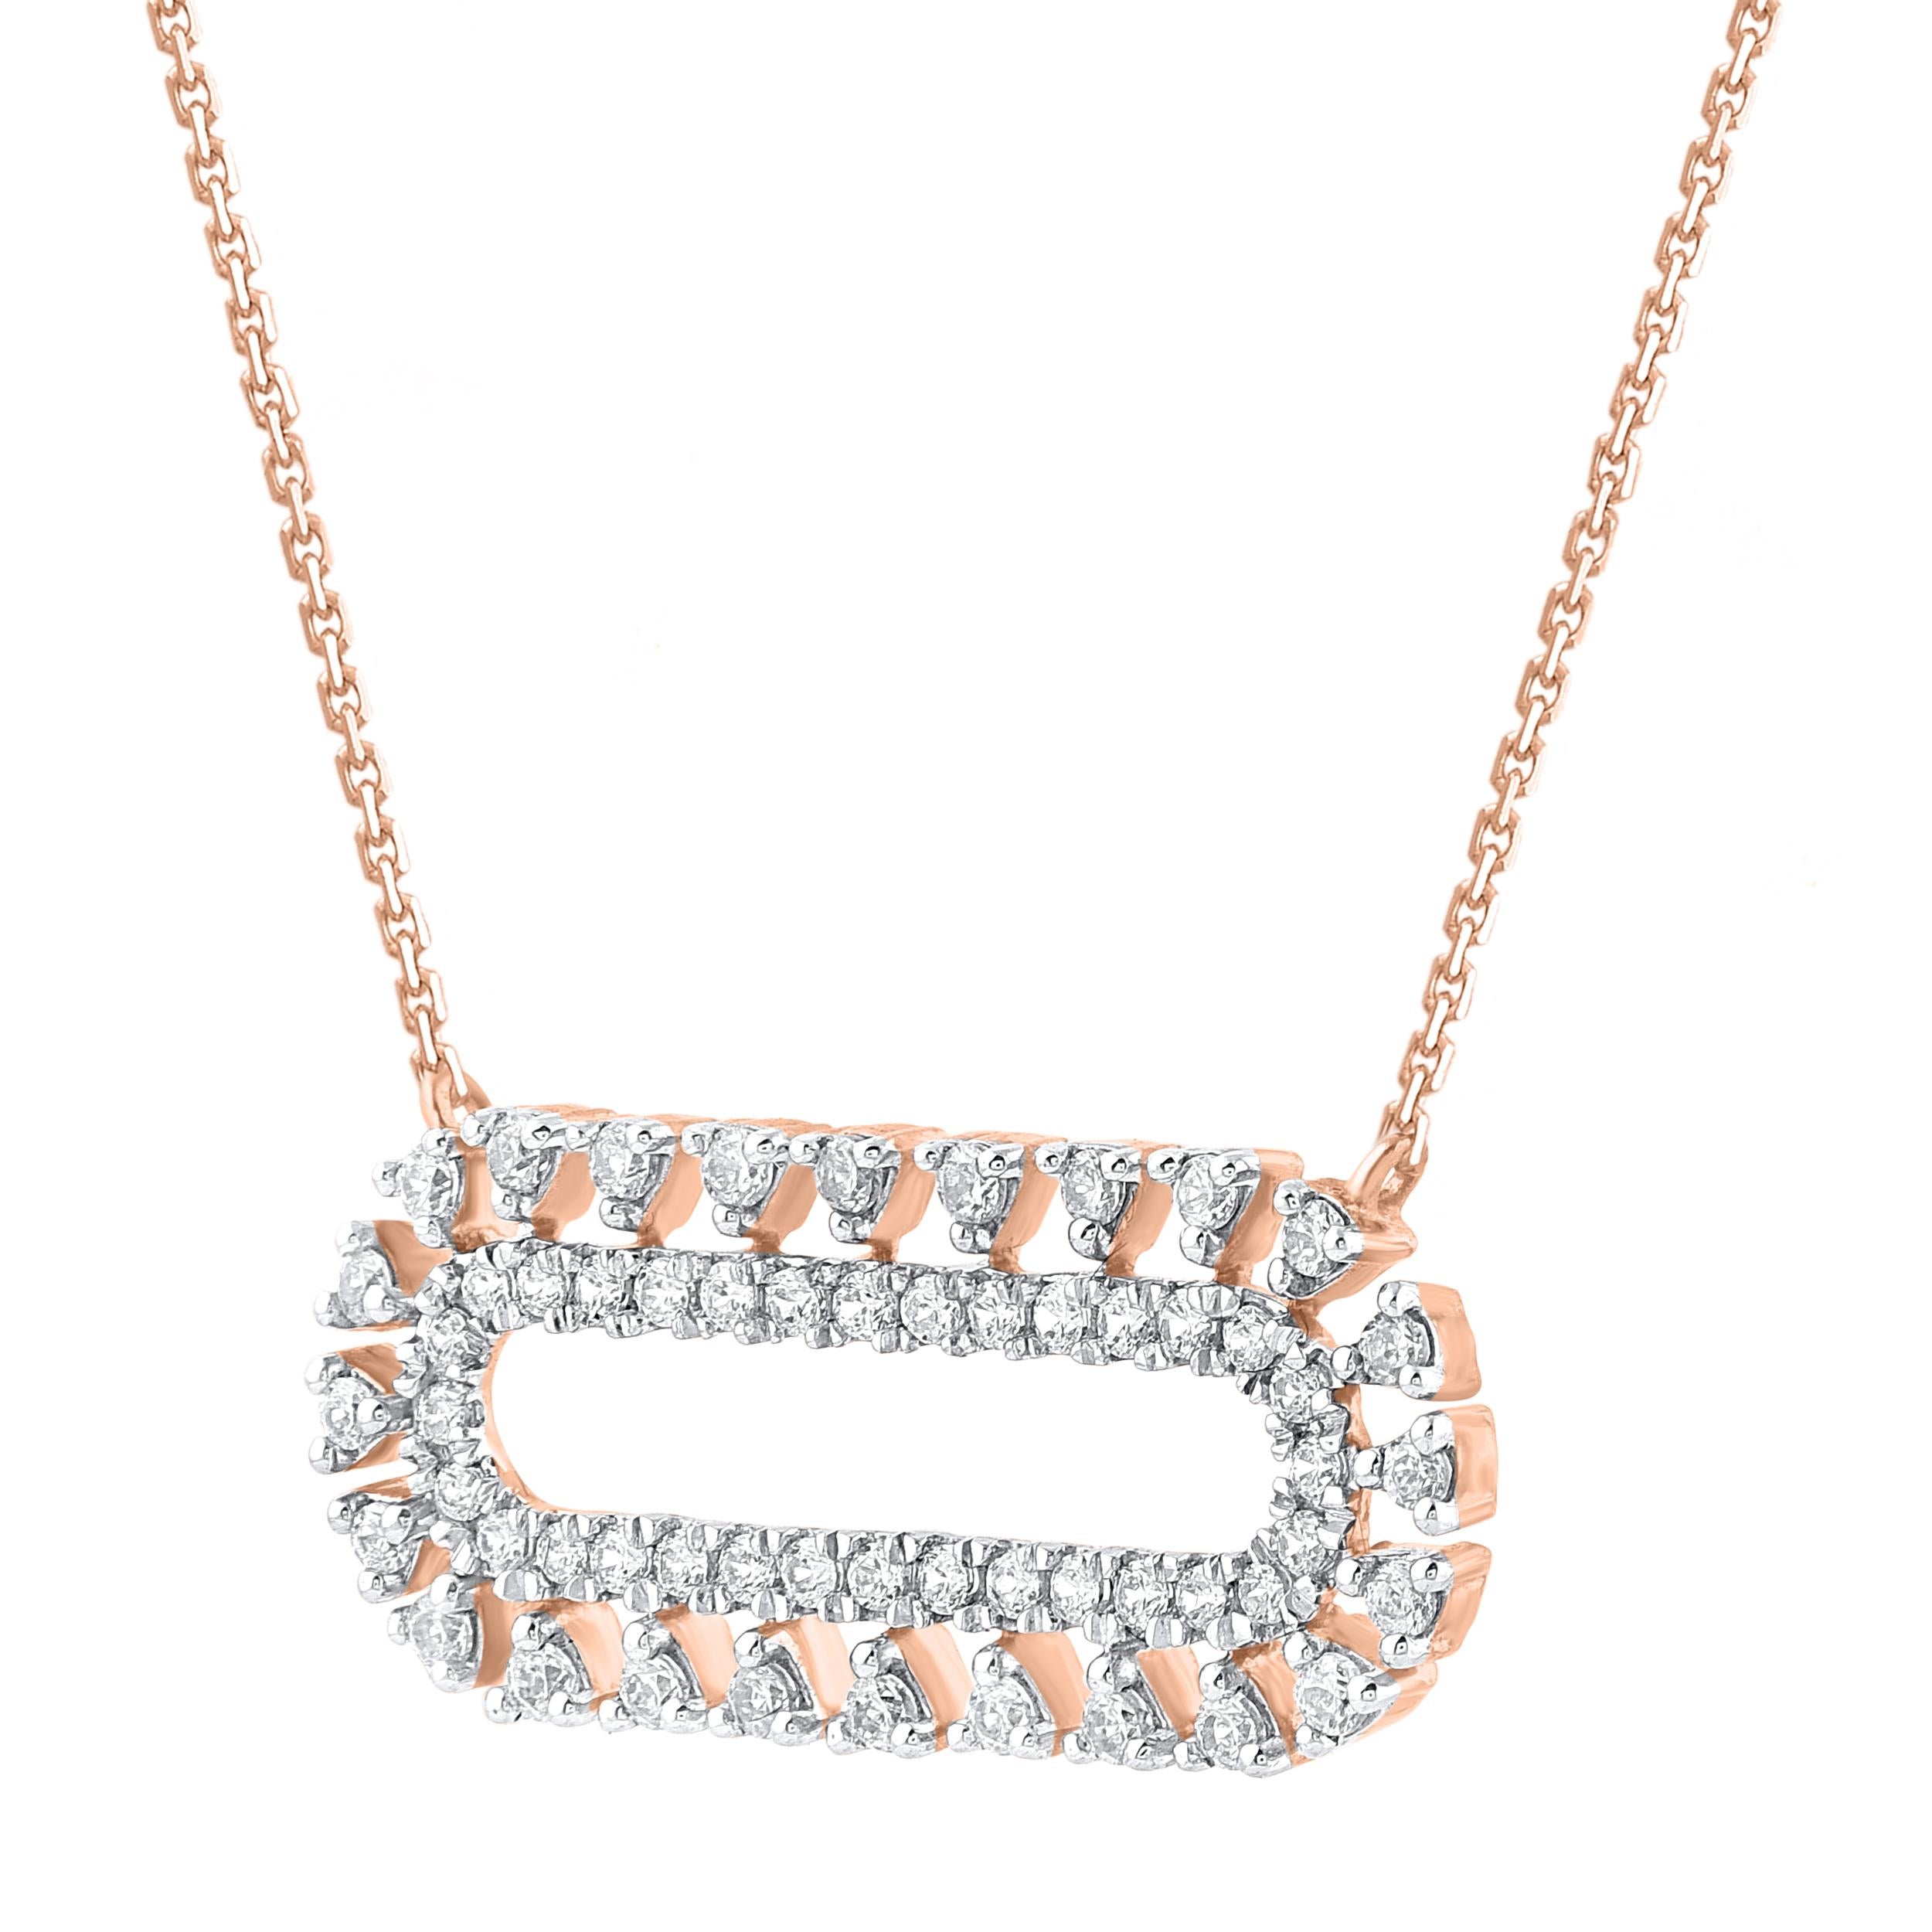 Bring charm to your look with this diamond bar necklace. This necklace is crafted from 14-karat rose gold and studded with 56 brilliant cut white diamonds in prong setting. H-I color I2 clarity and a high polish finish complete the brilliant